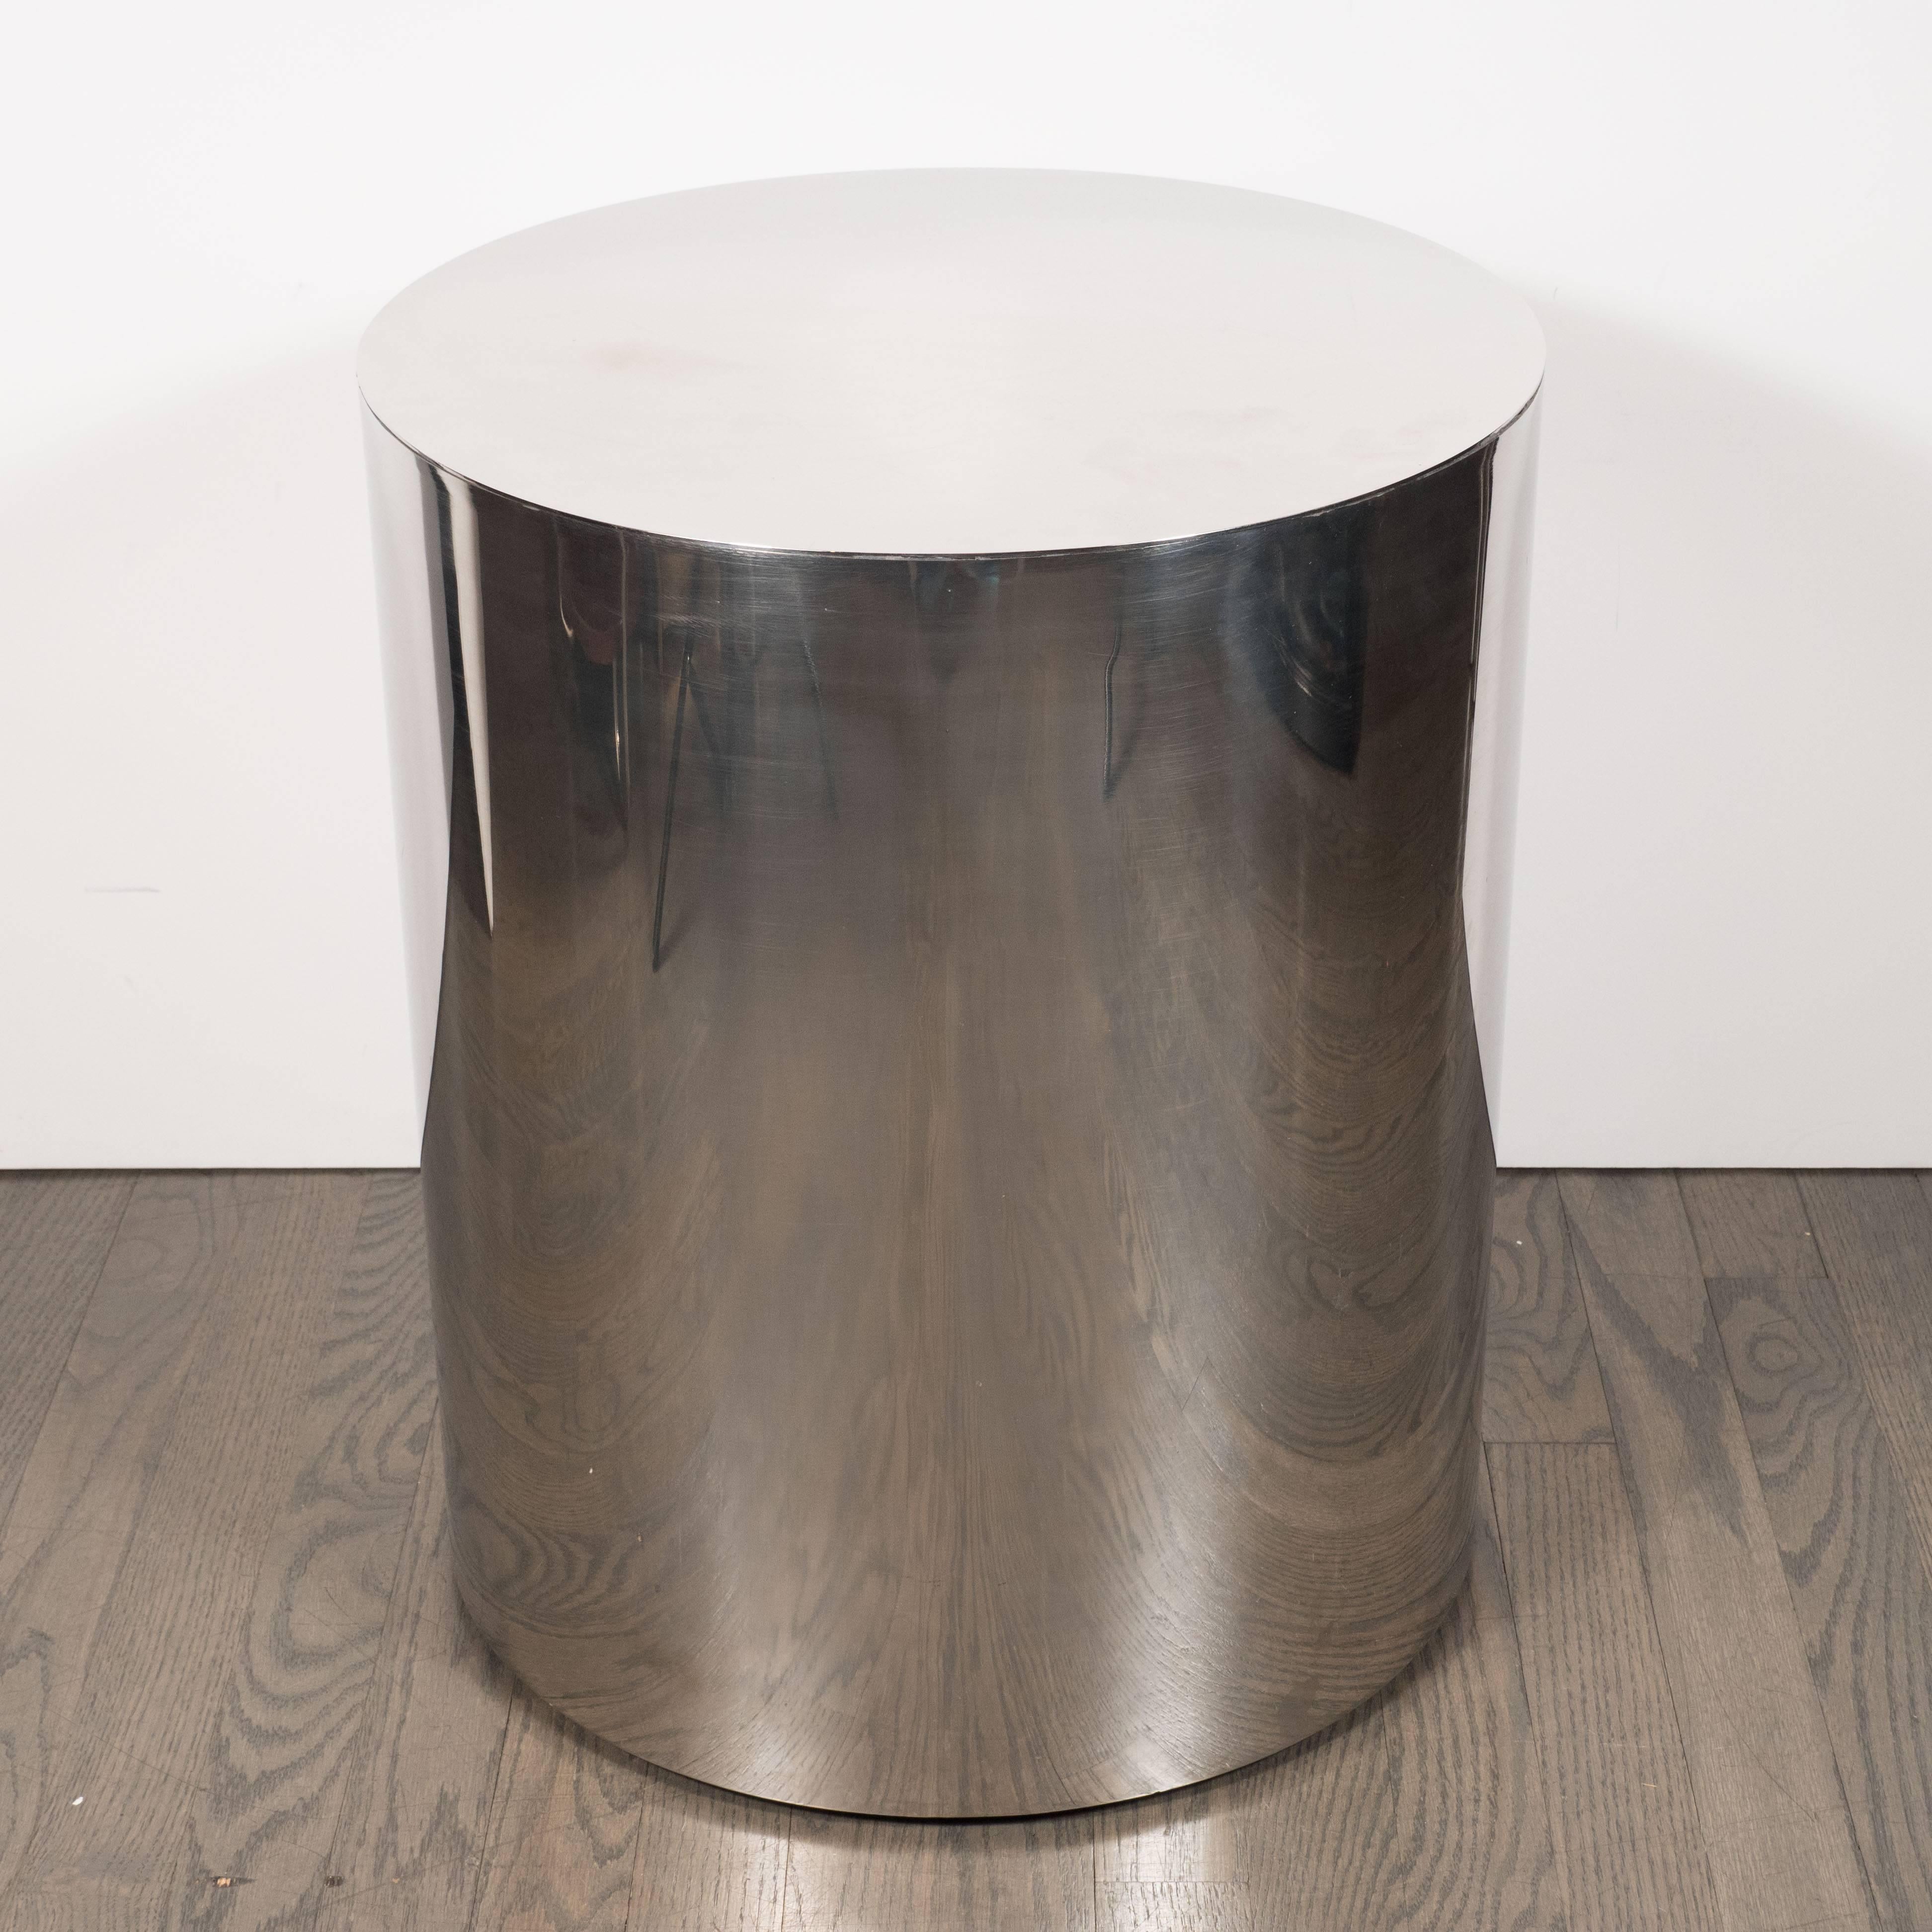 This pedestal was realized in the United States, circa 1970. Composed of a simple cylindrical form in lustrous chrome, it would be perfect as a side table in a contemporary or Mid-Century Modern interior, or used as a pedestal for presenting a